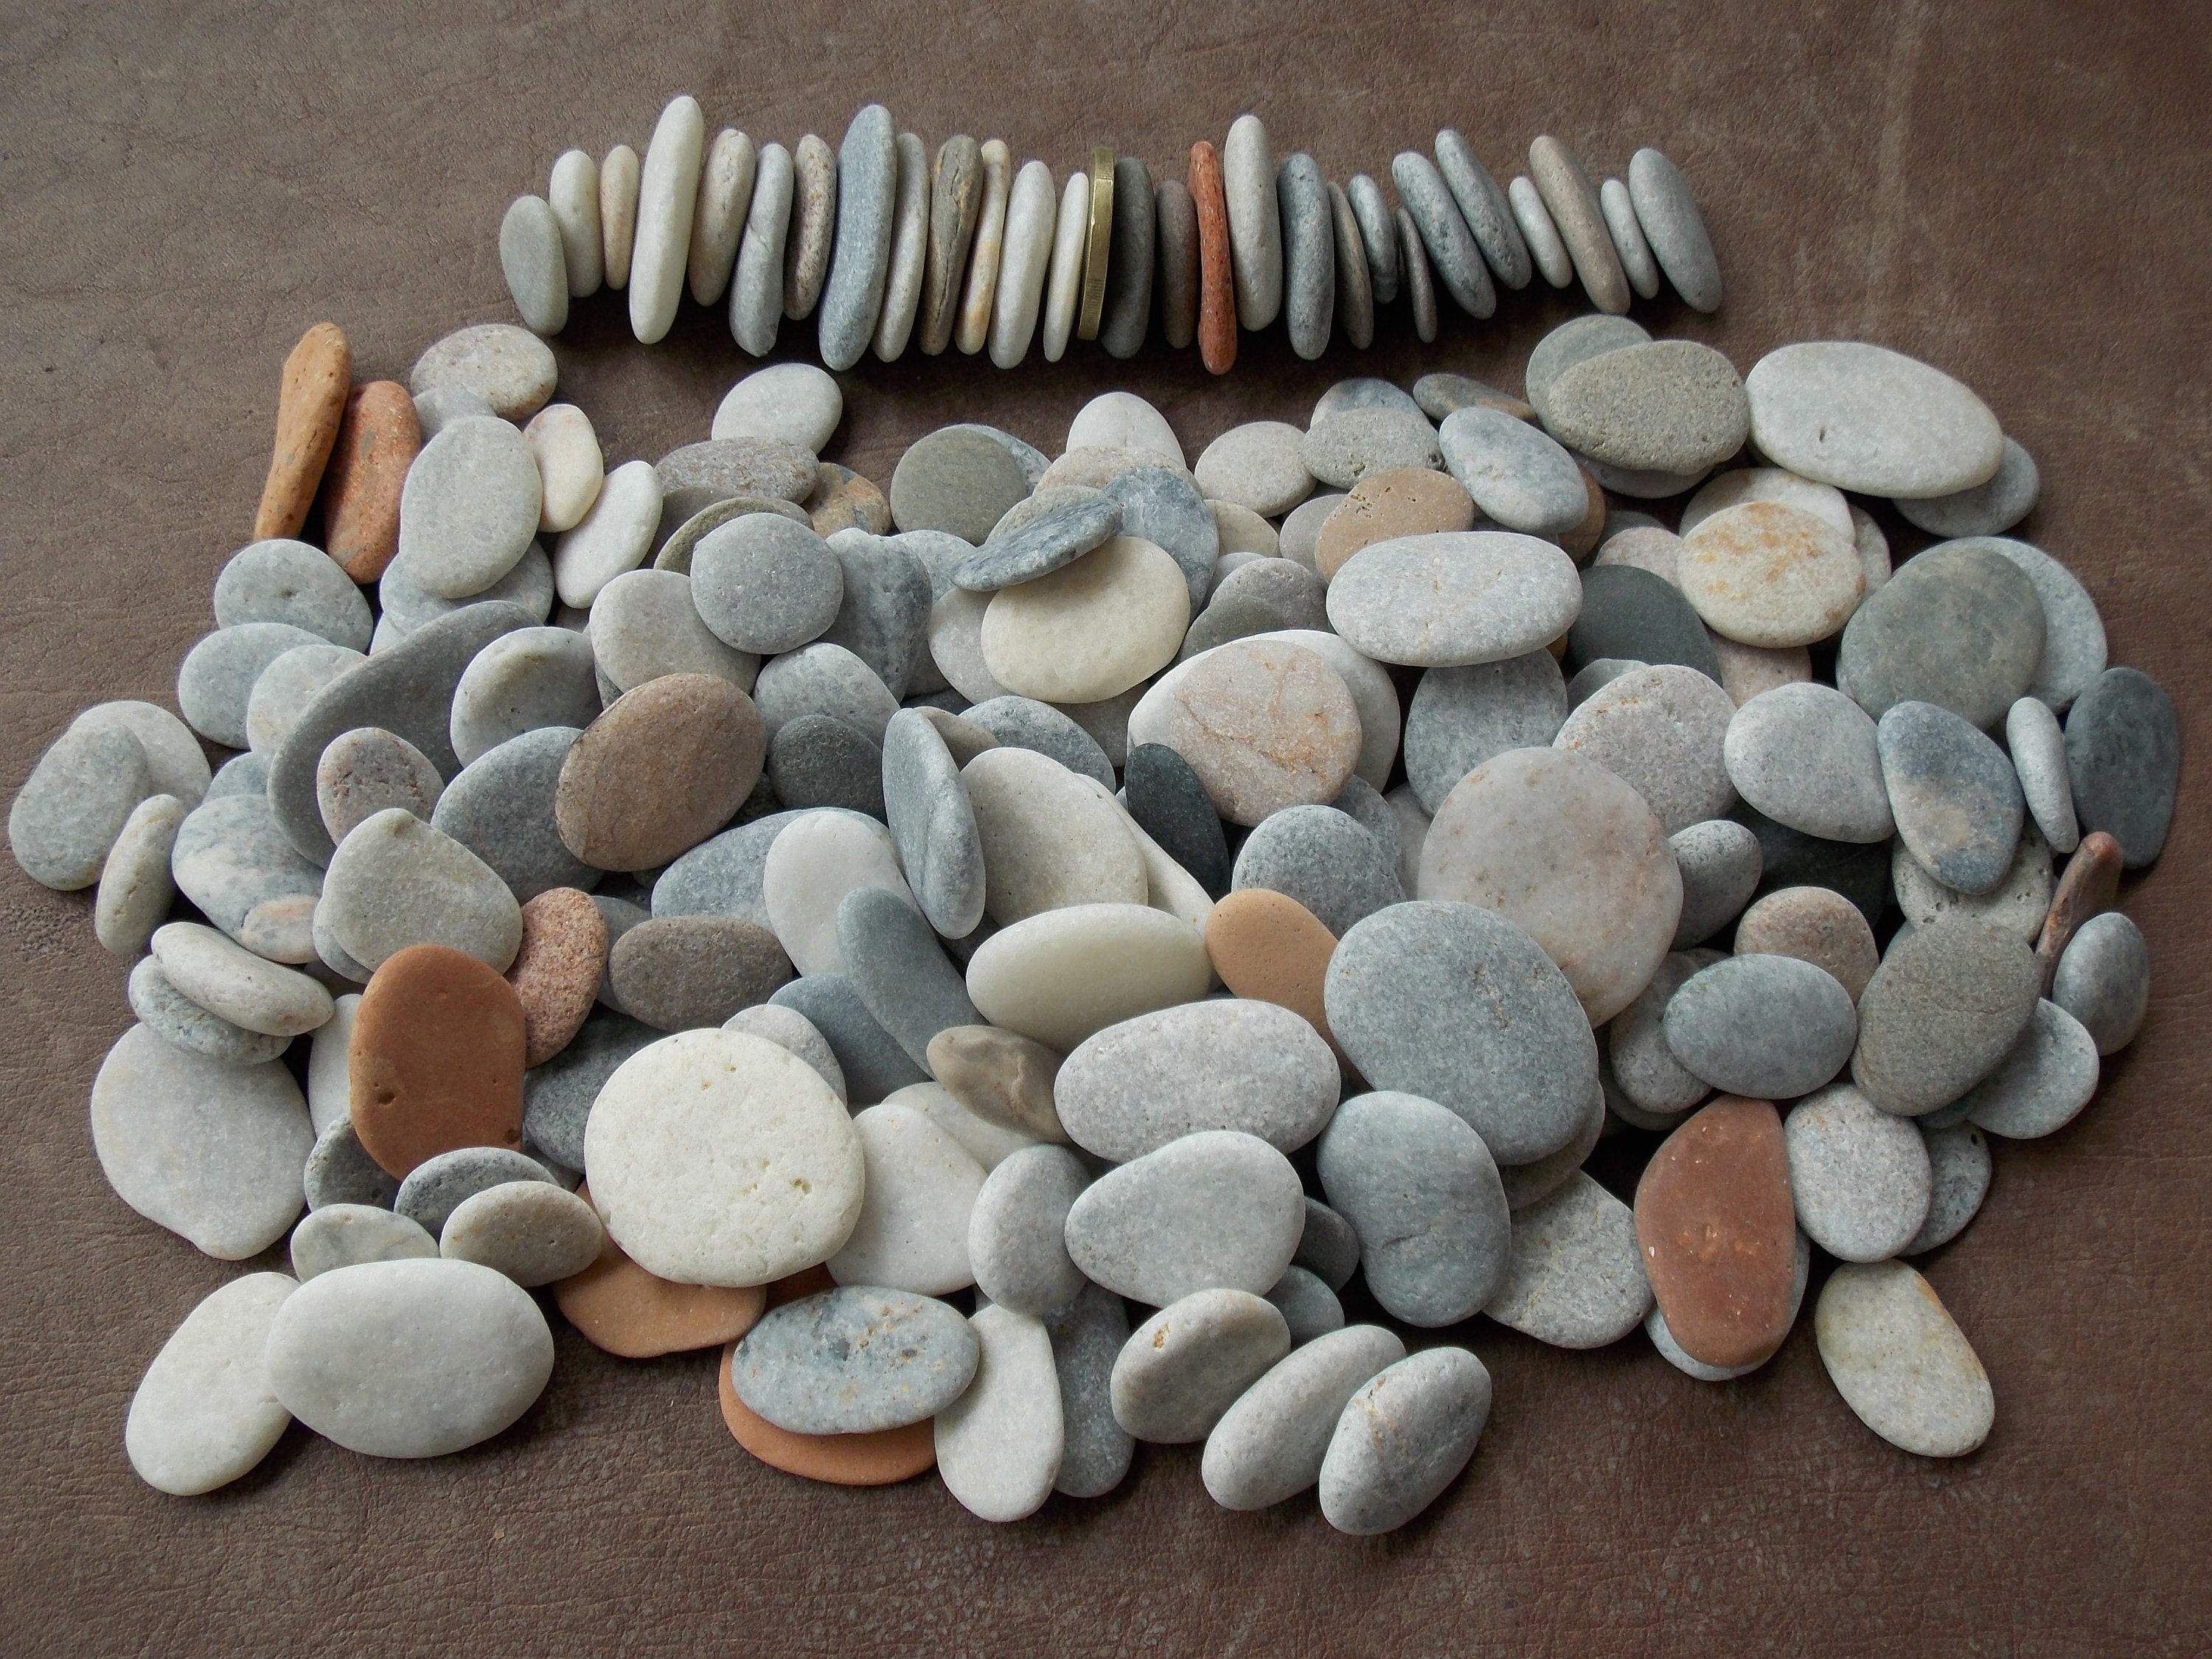 2kg Mixed Sized Assorted Sea Flat Pebbles Stones For Pebble Art Crafts #2kg 